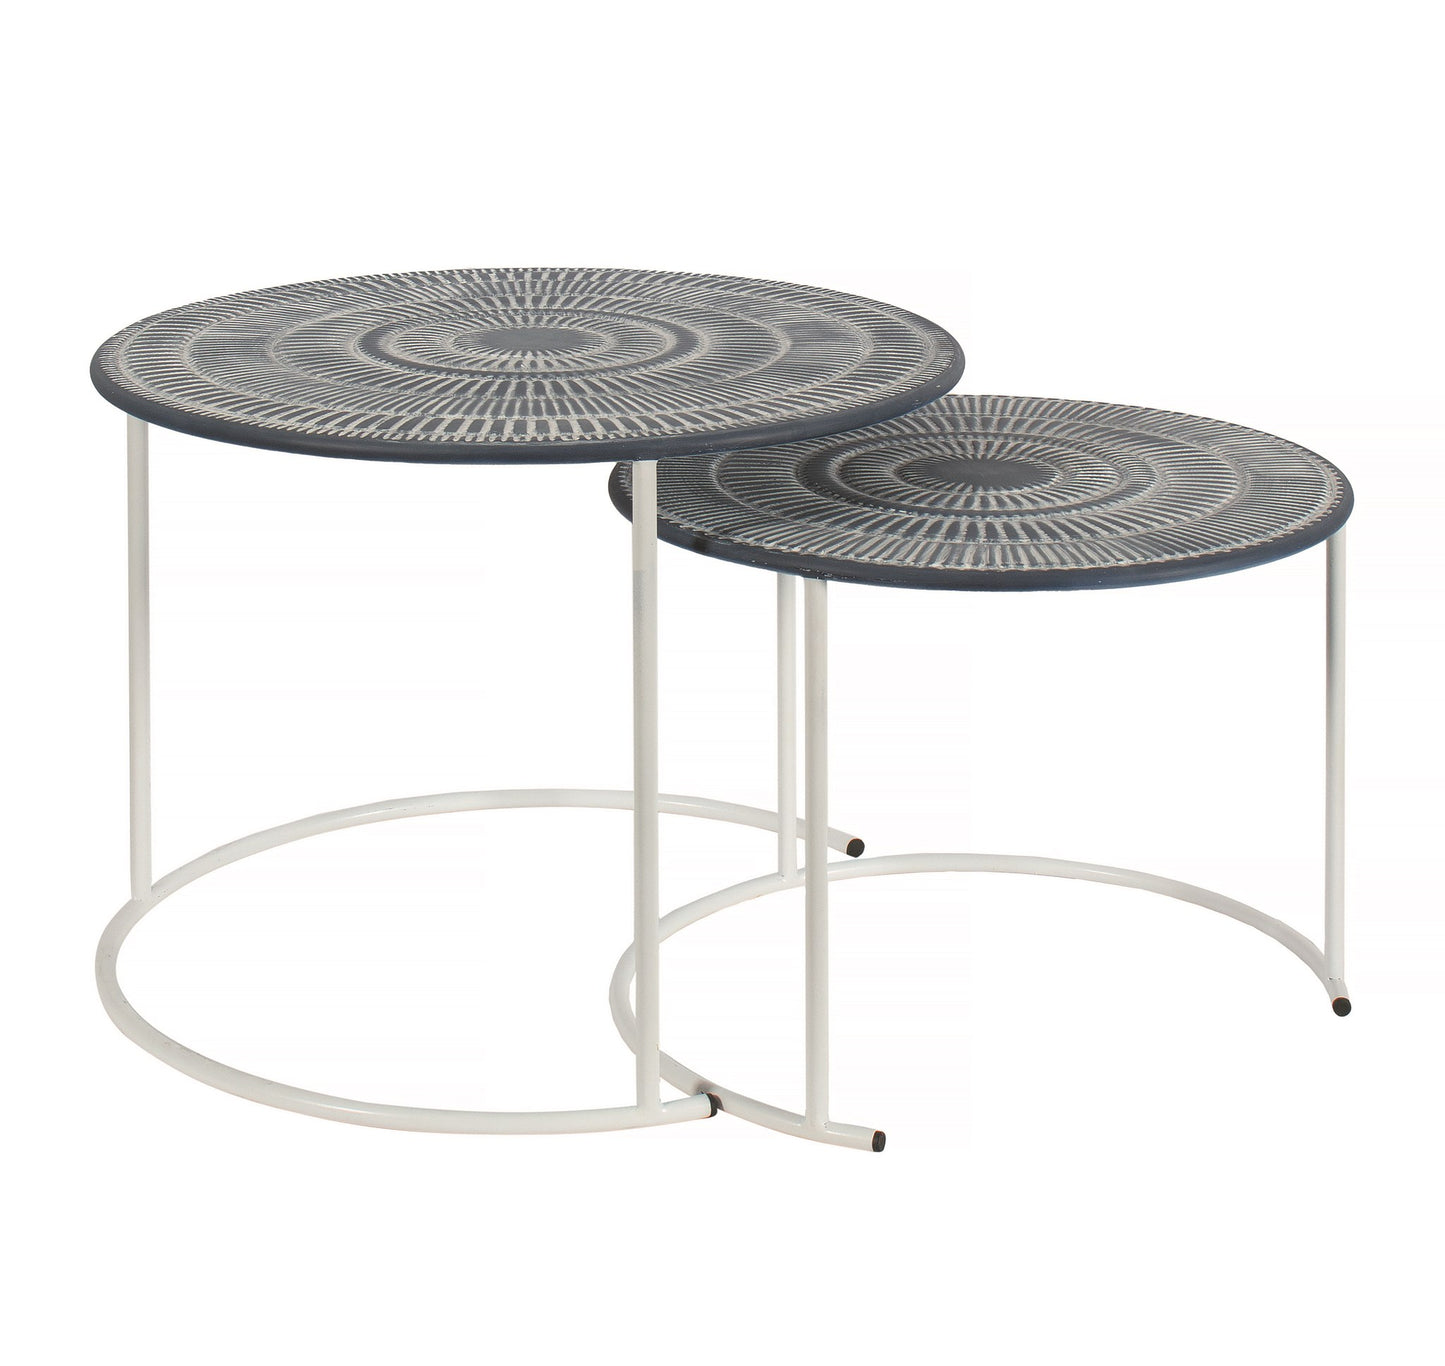 Table-blue   Low Set of 2